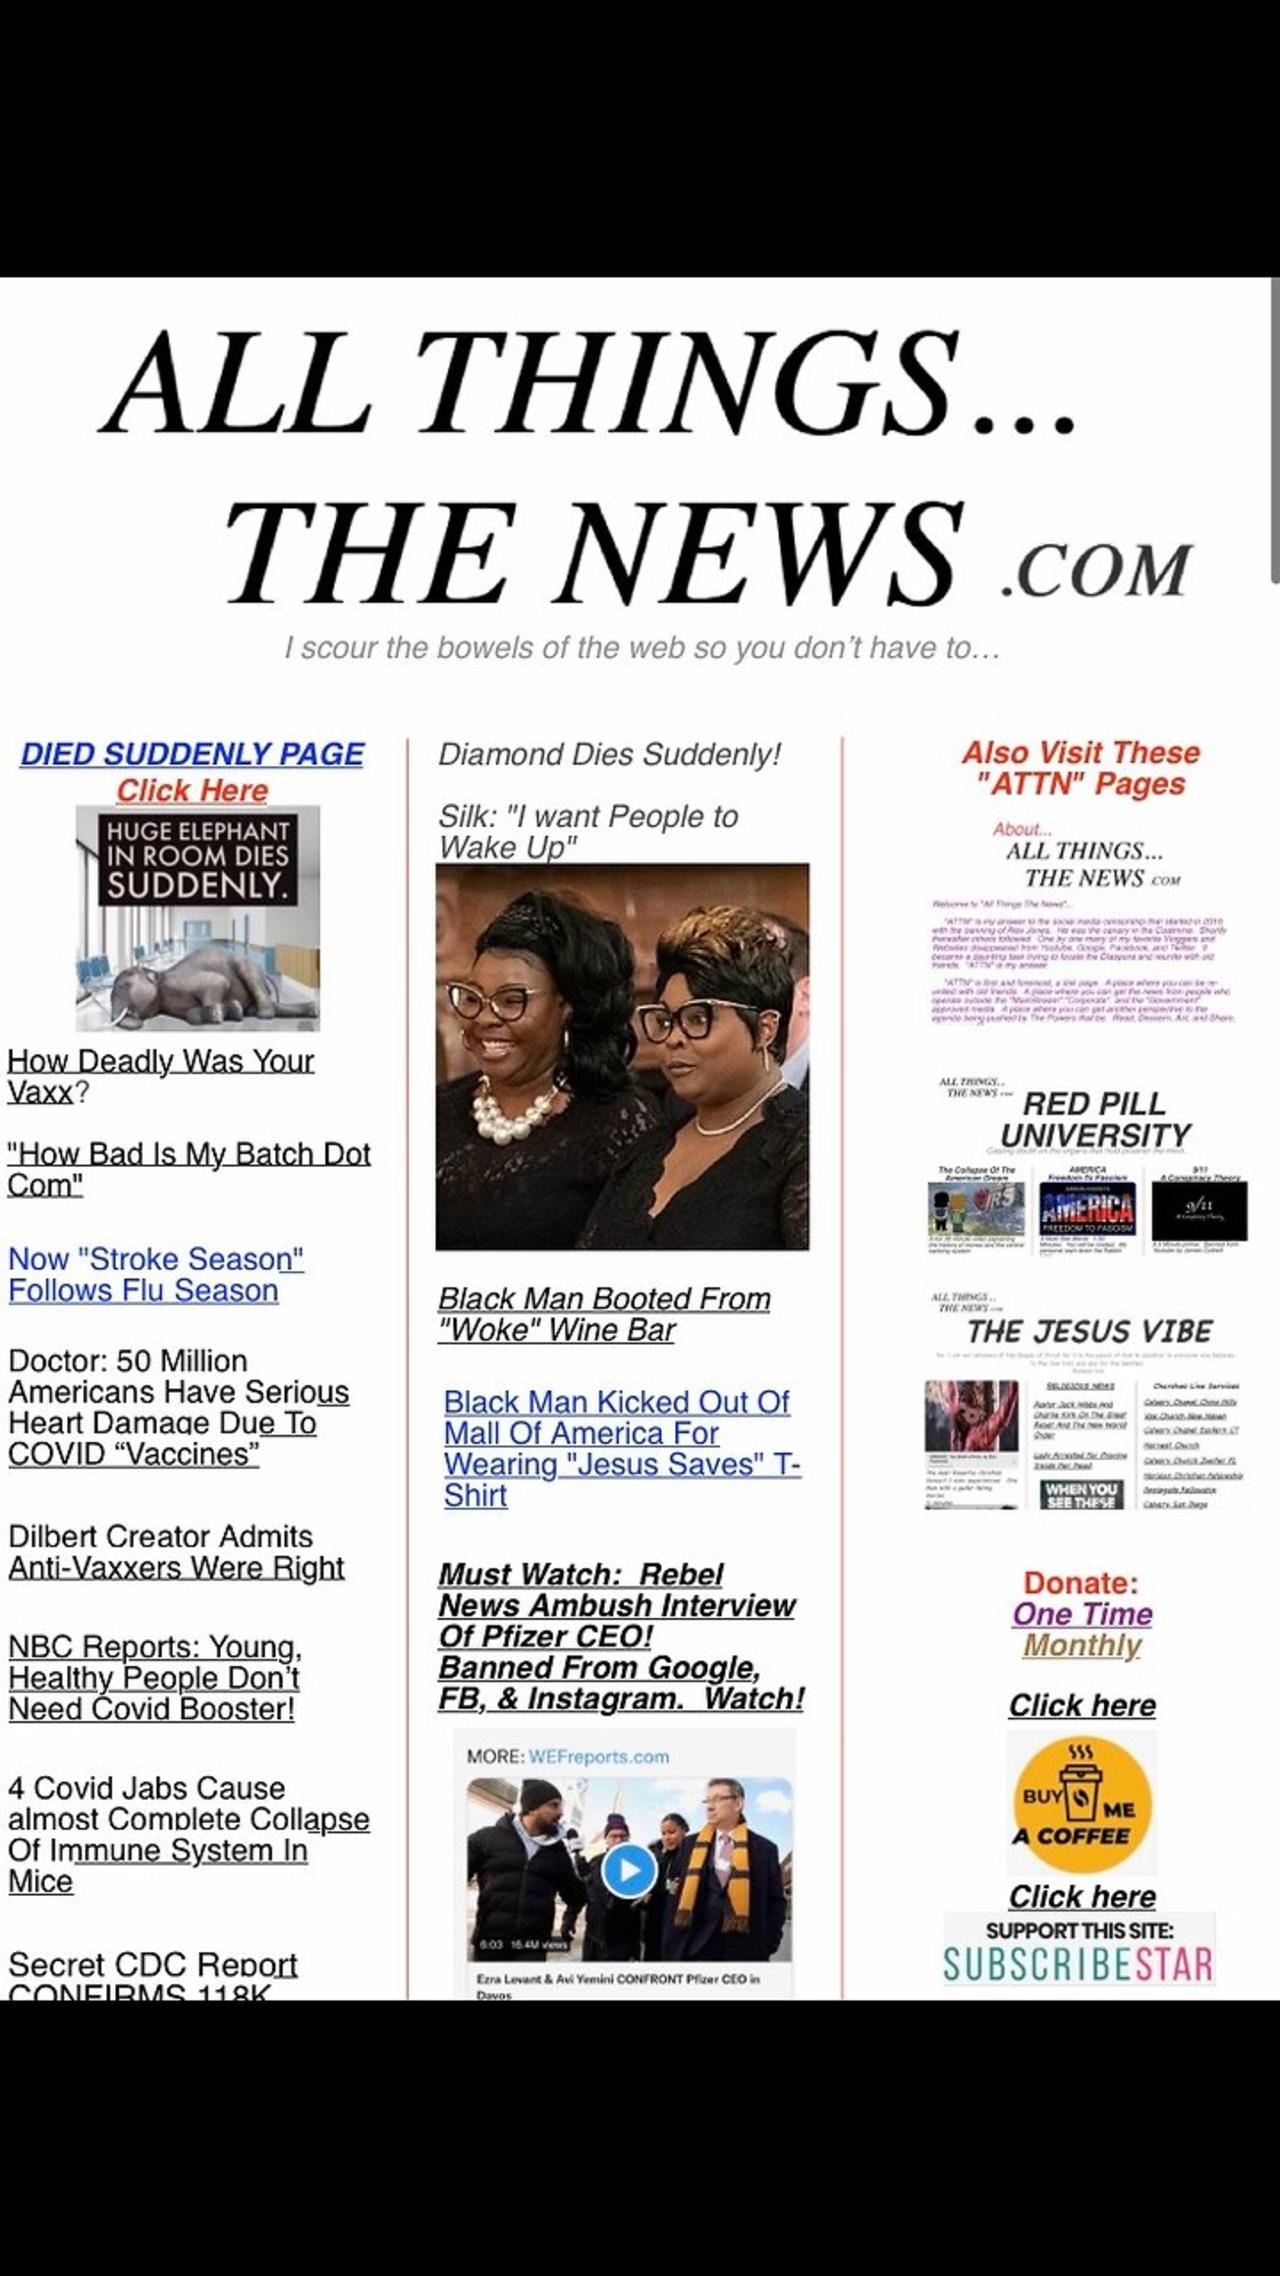 Guided Tour of "All Things The News" Dot Com